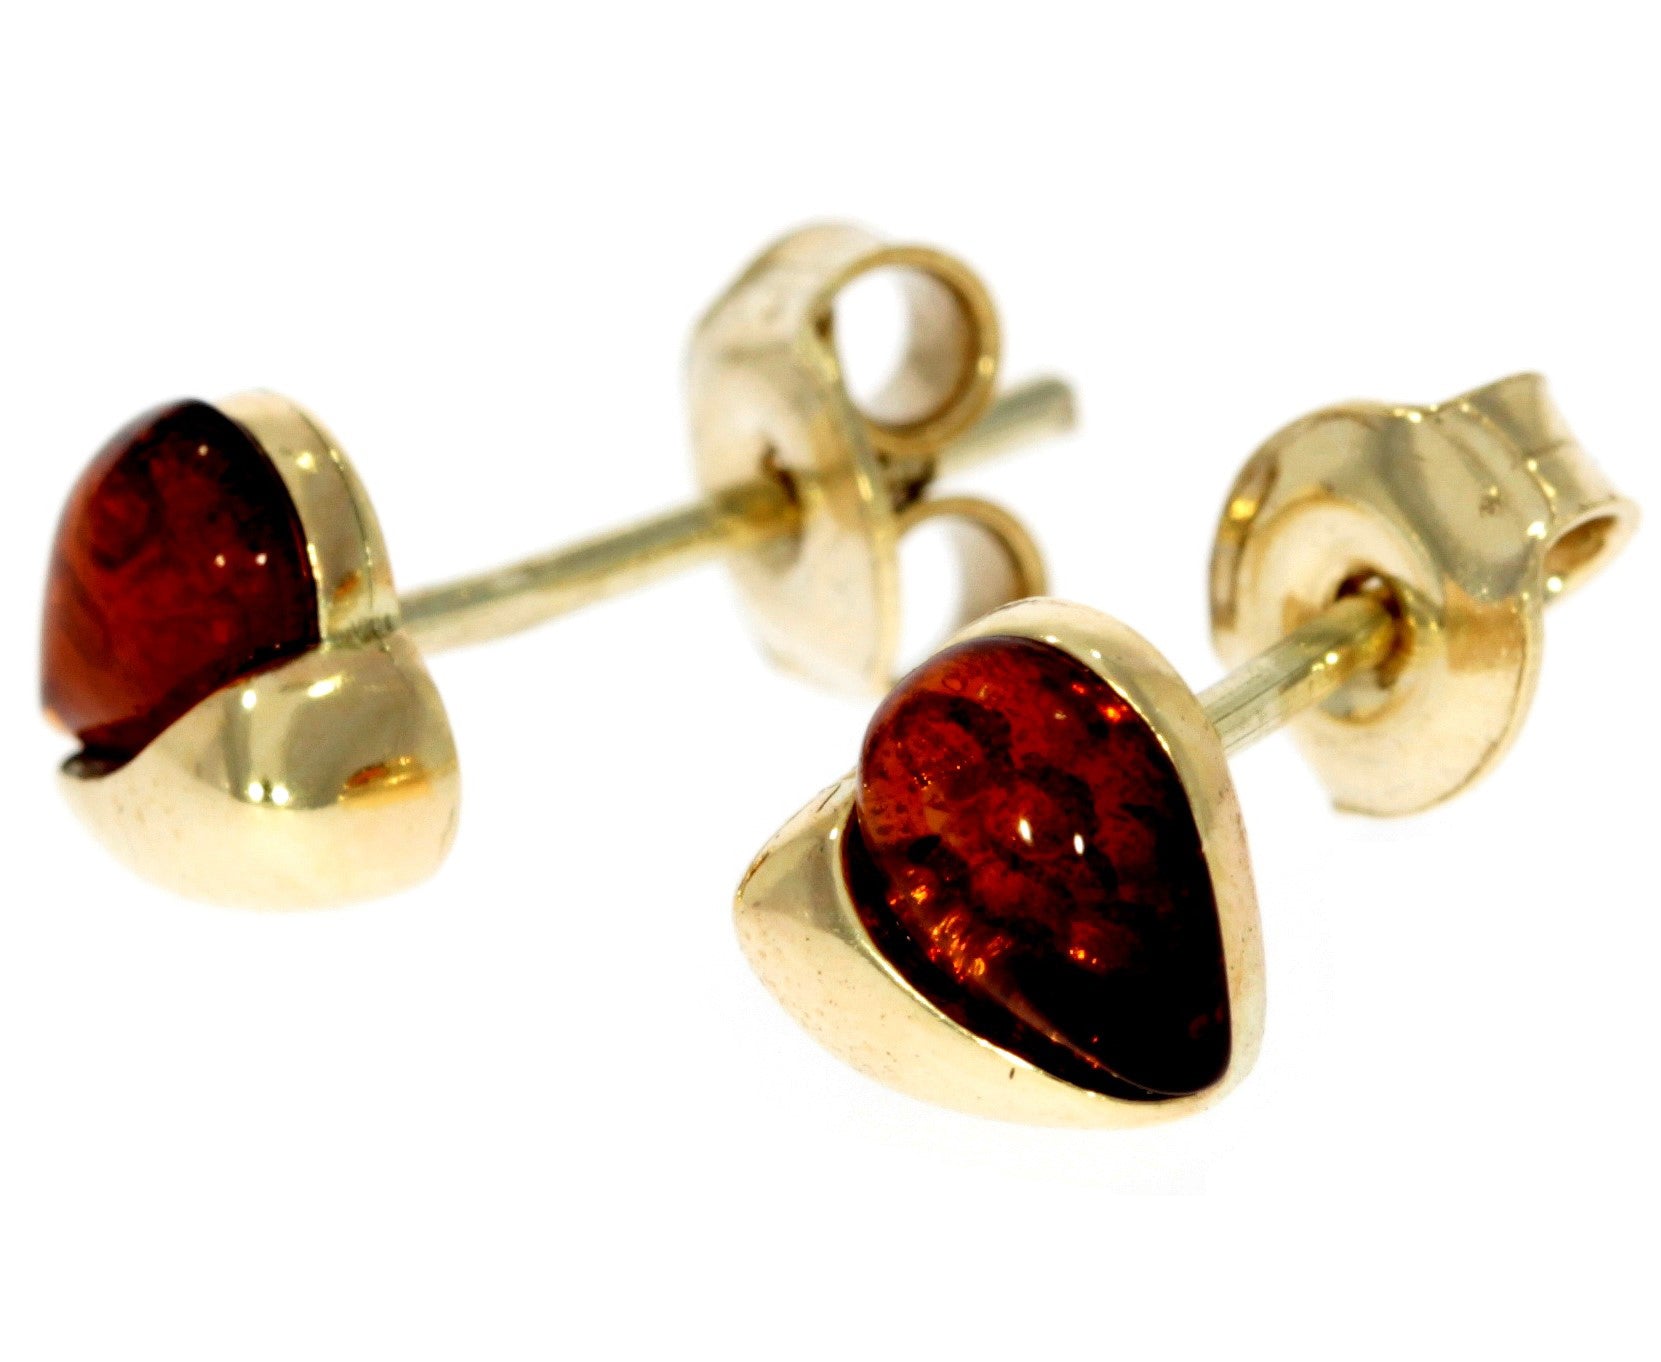 Genuine Baltic Amber and 9ct Gold Studs Heart Earrings - GE003